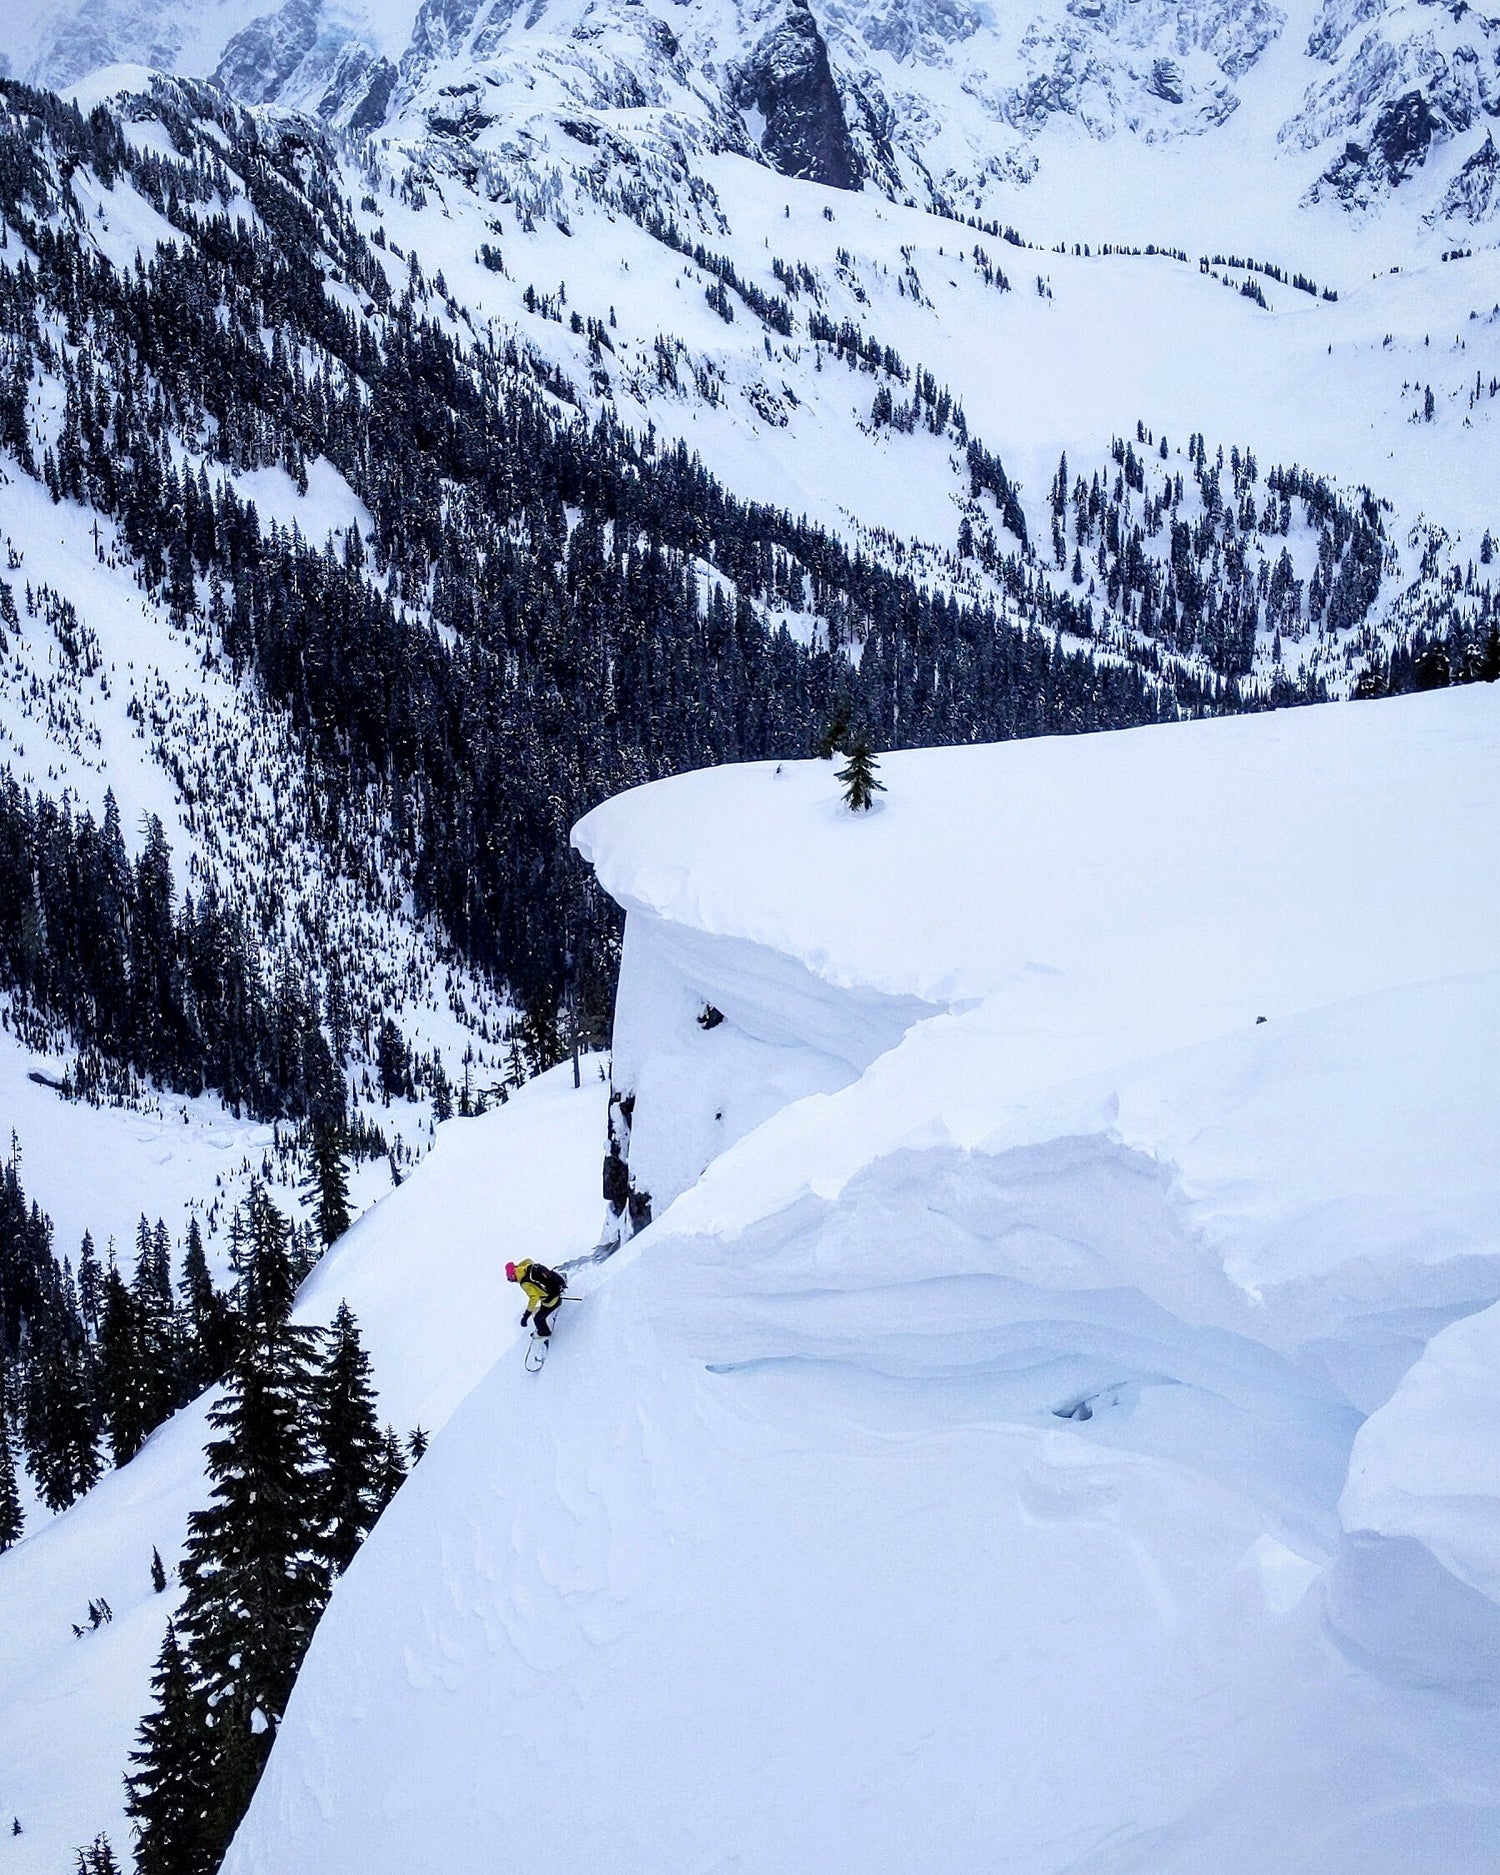 Lead Guide and Guided Exposure founder finding great terrain on the home turf in the Mount Baker Backcountry.